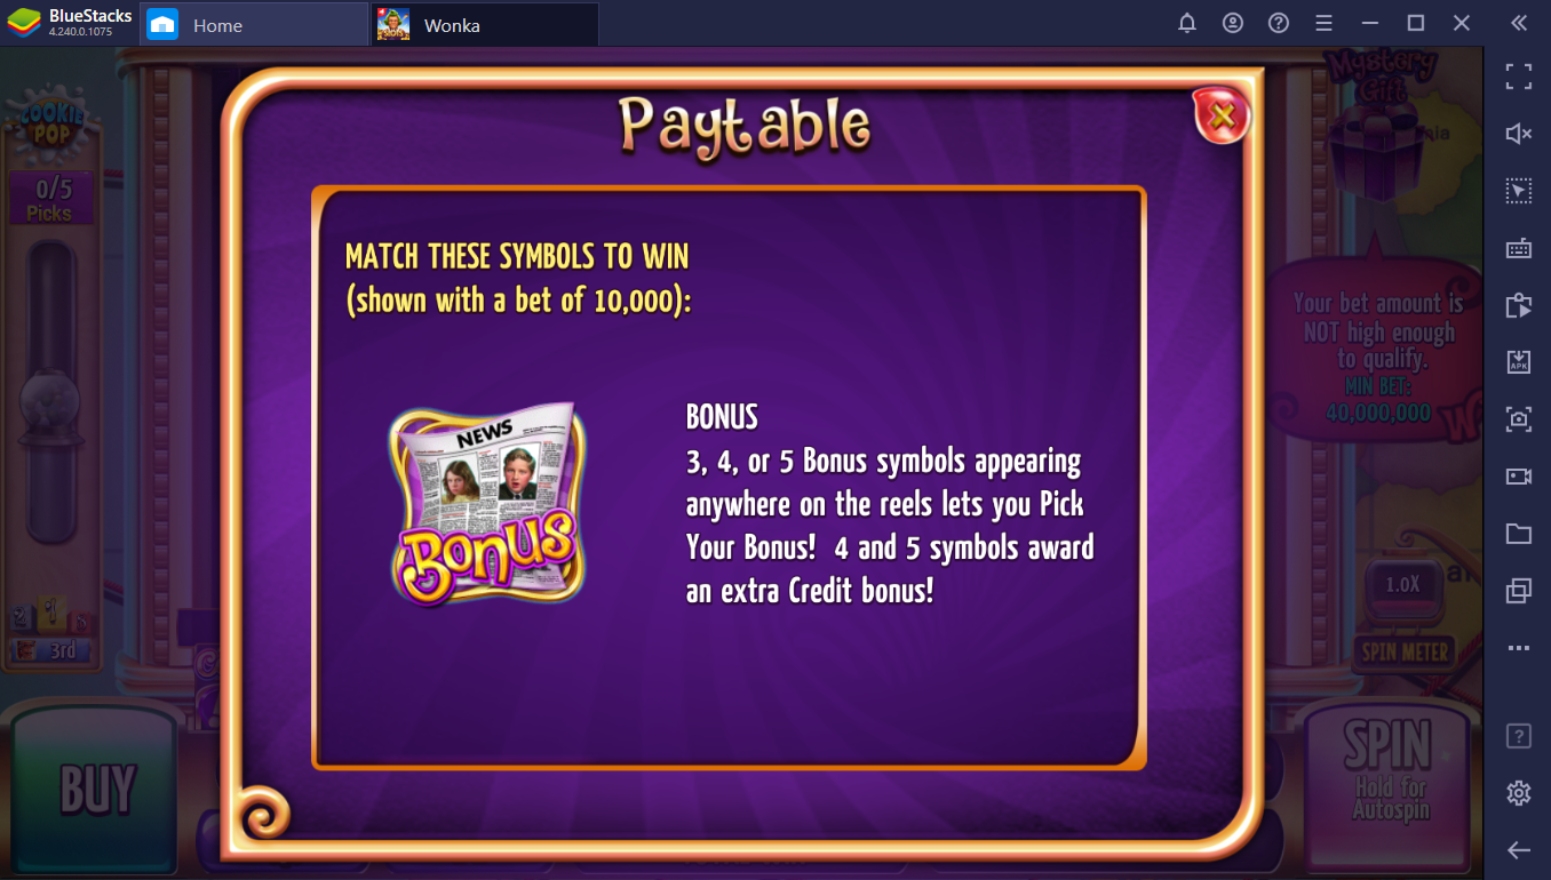 Beginner's Guide to Playing Willy Wonka Casino on PC